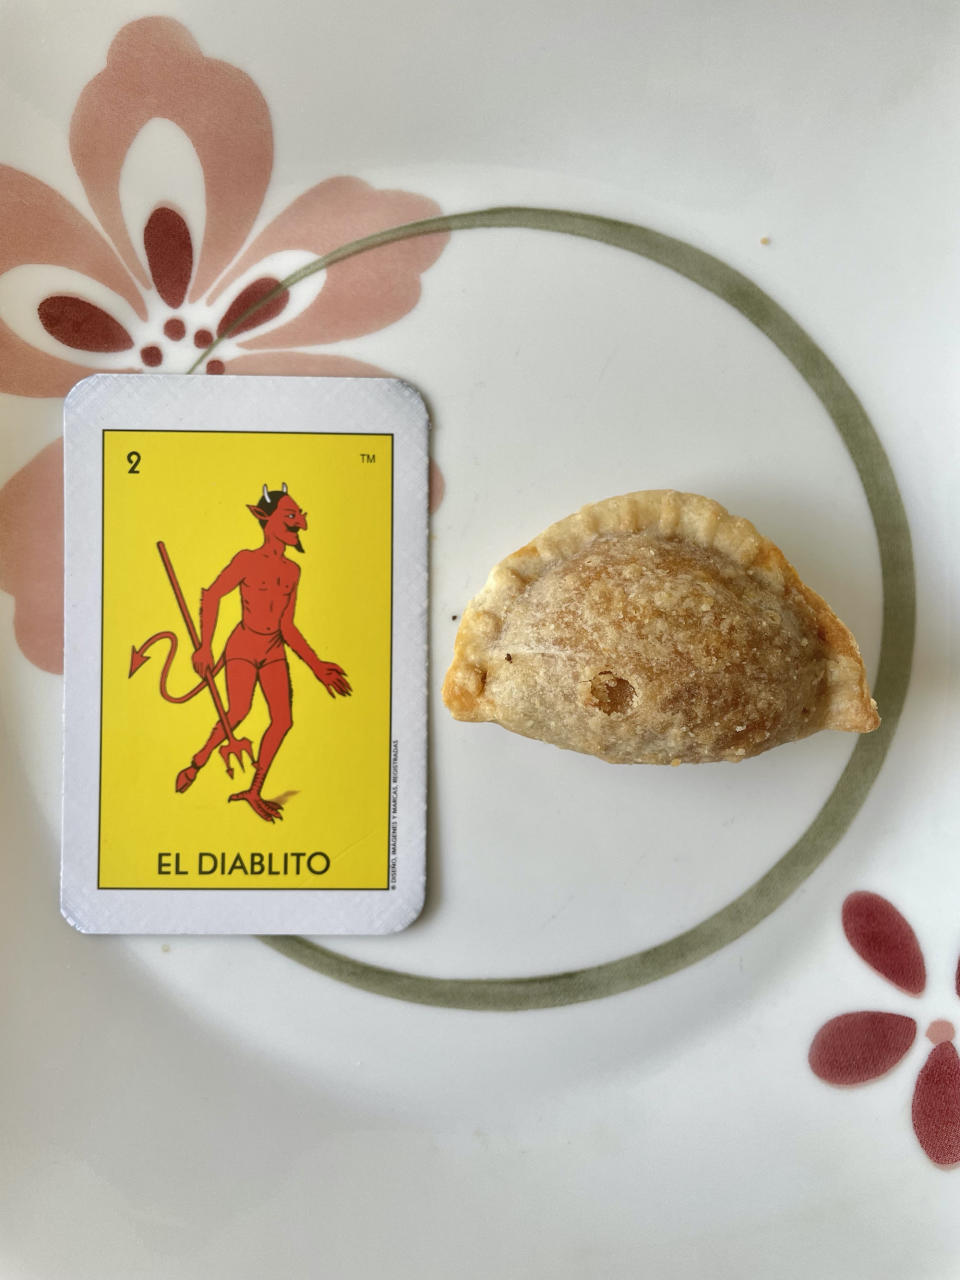 A Loteria card and the empanada on a plate, with the empanada being about half the length and the same width